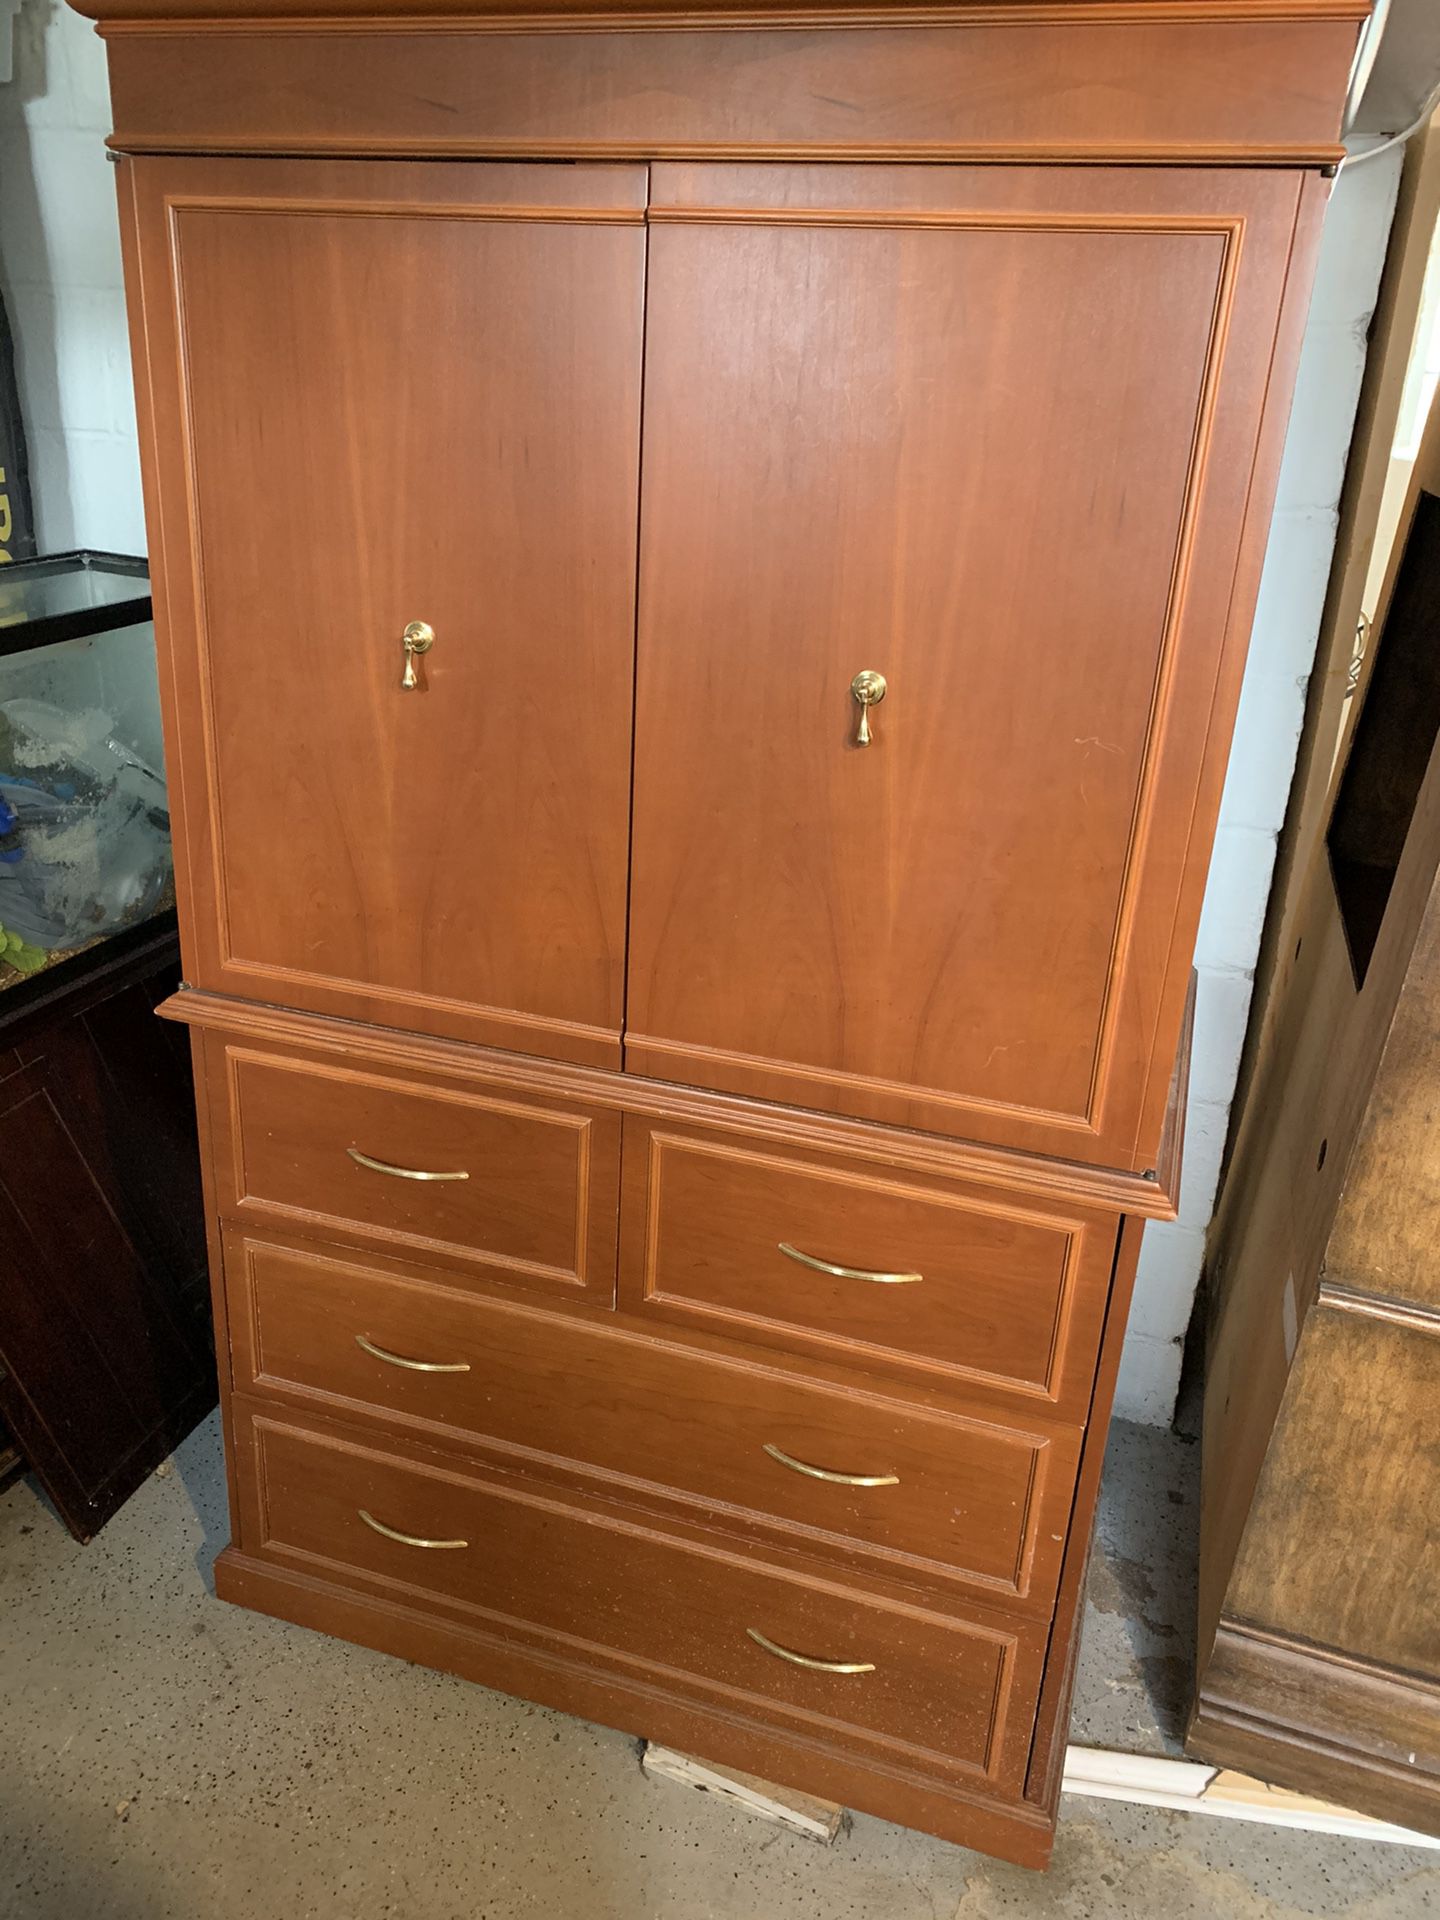 Armoire. Three row of drawers and top opens for tv or other storage. 62” tall x 44” wide x 26” deep